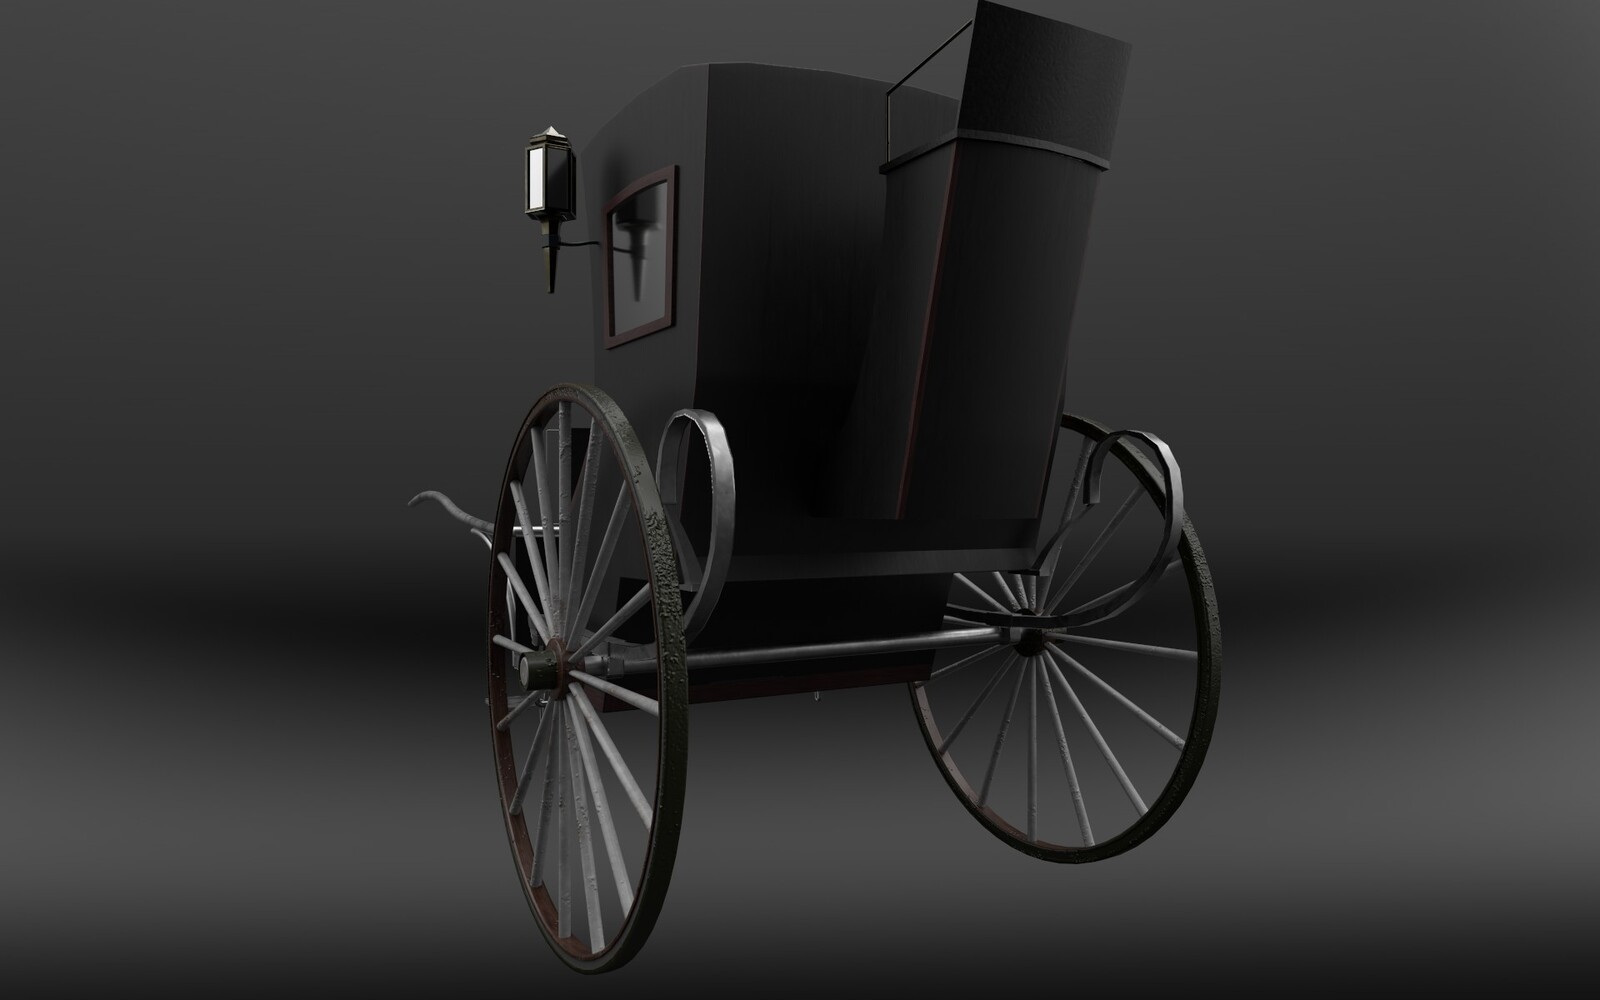 Final render of the car #2